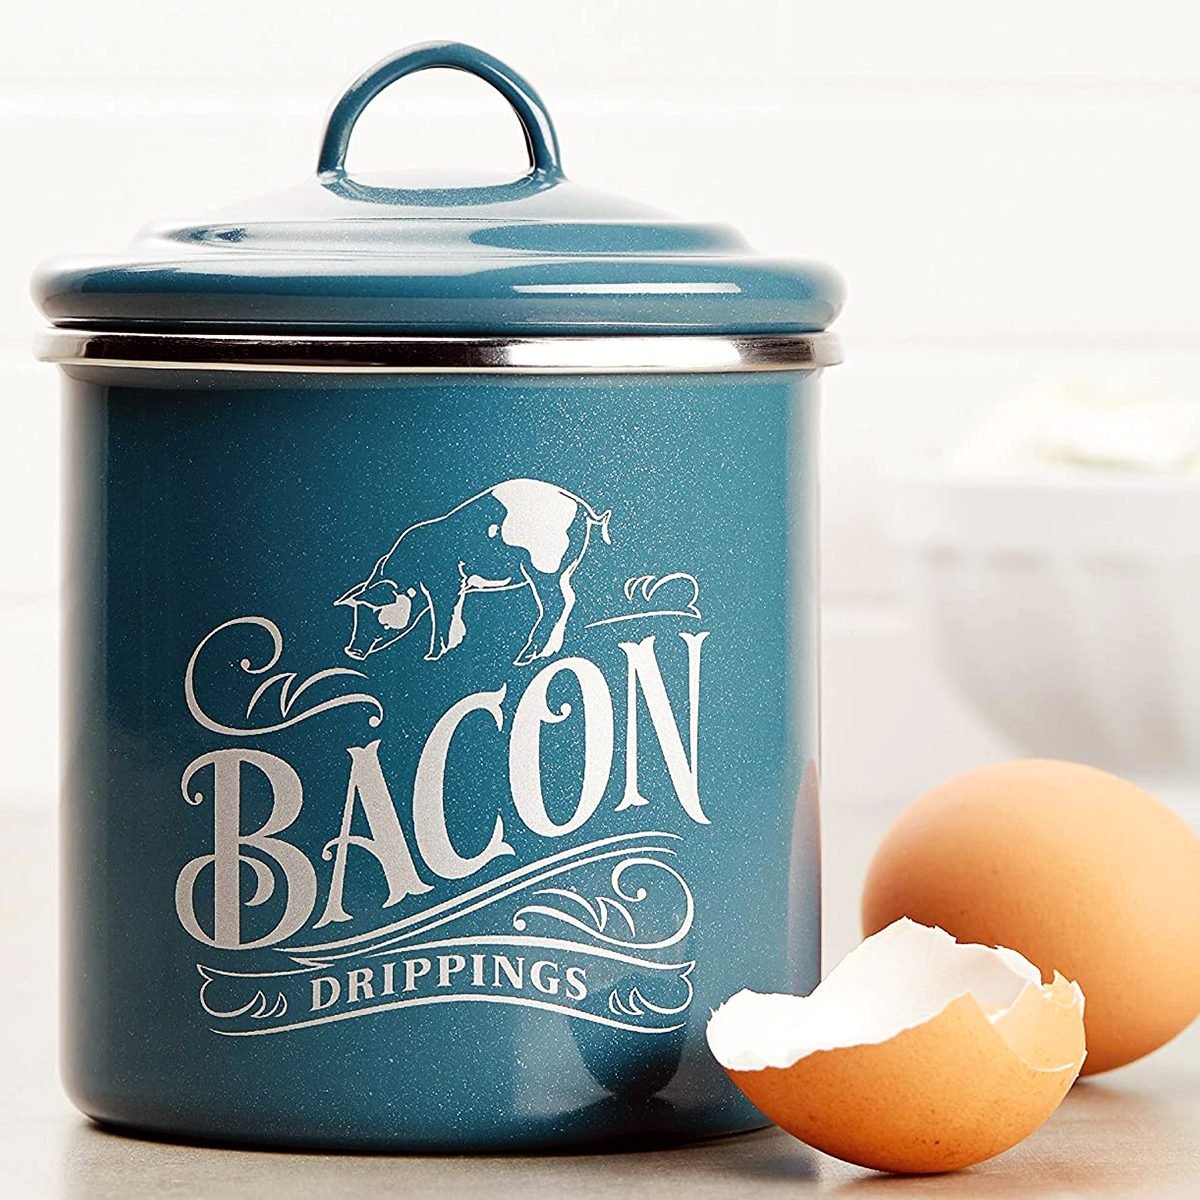 Ceramic Bacon Grease Container Keeper with Strainer,Turquoise